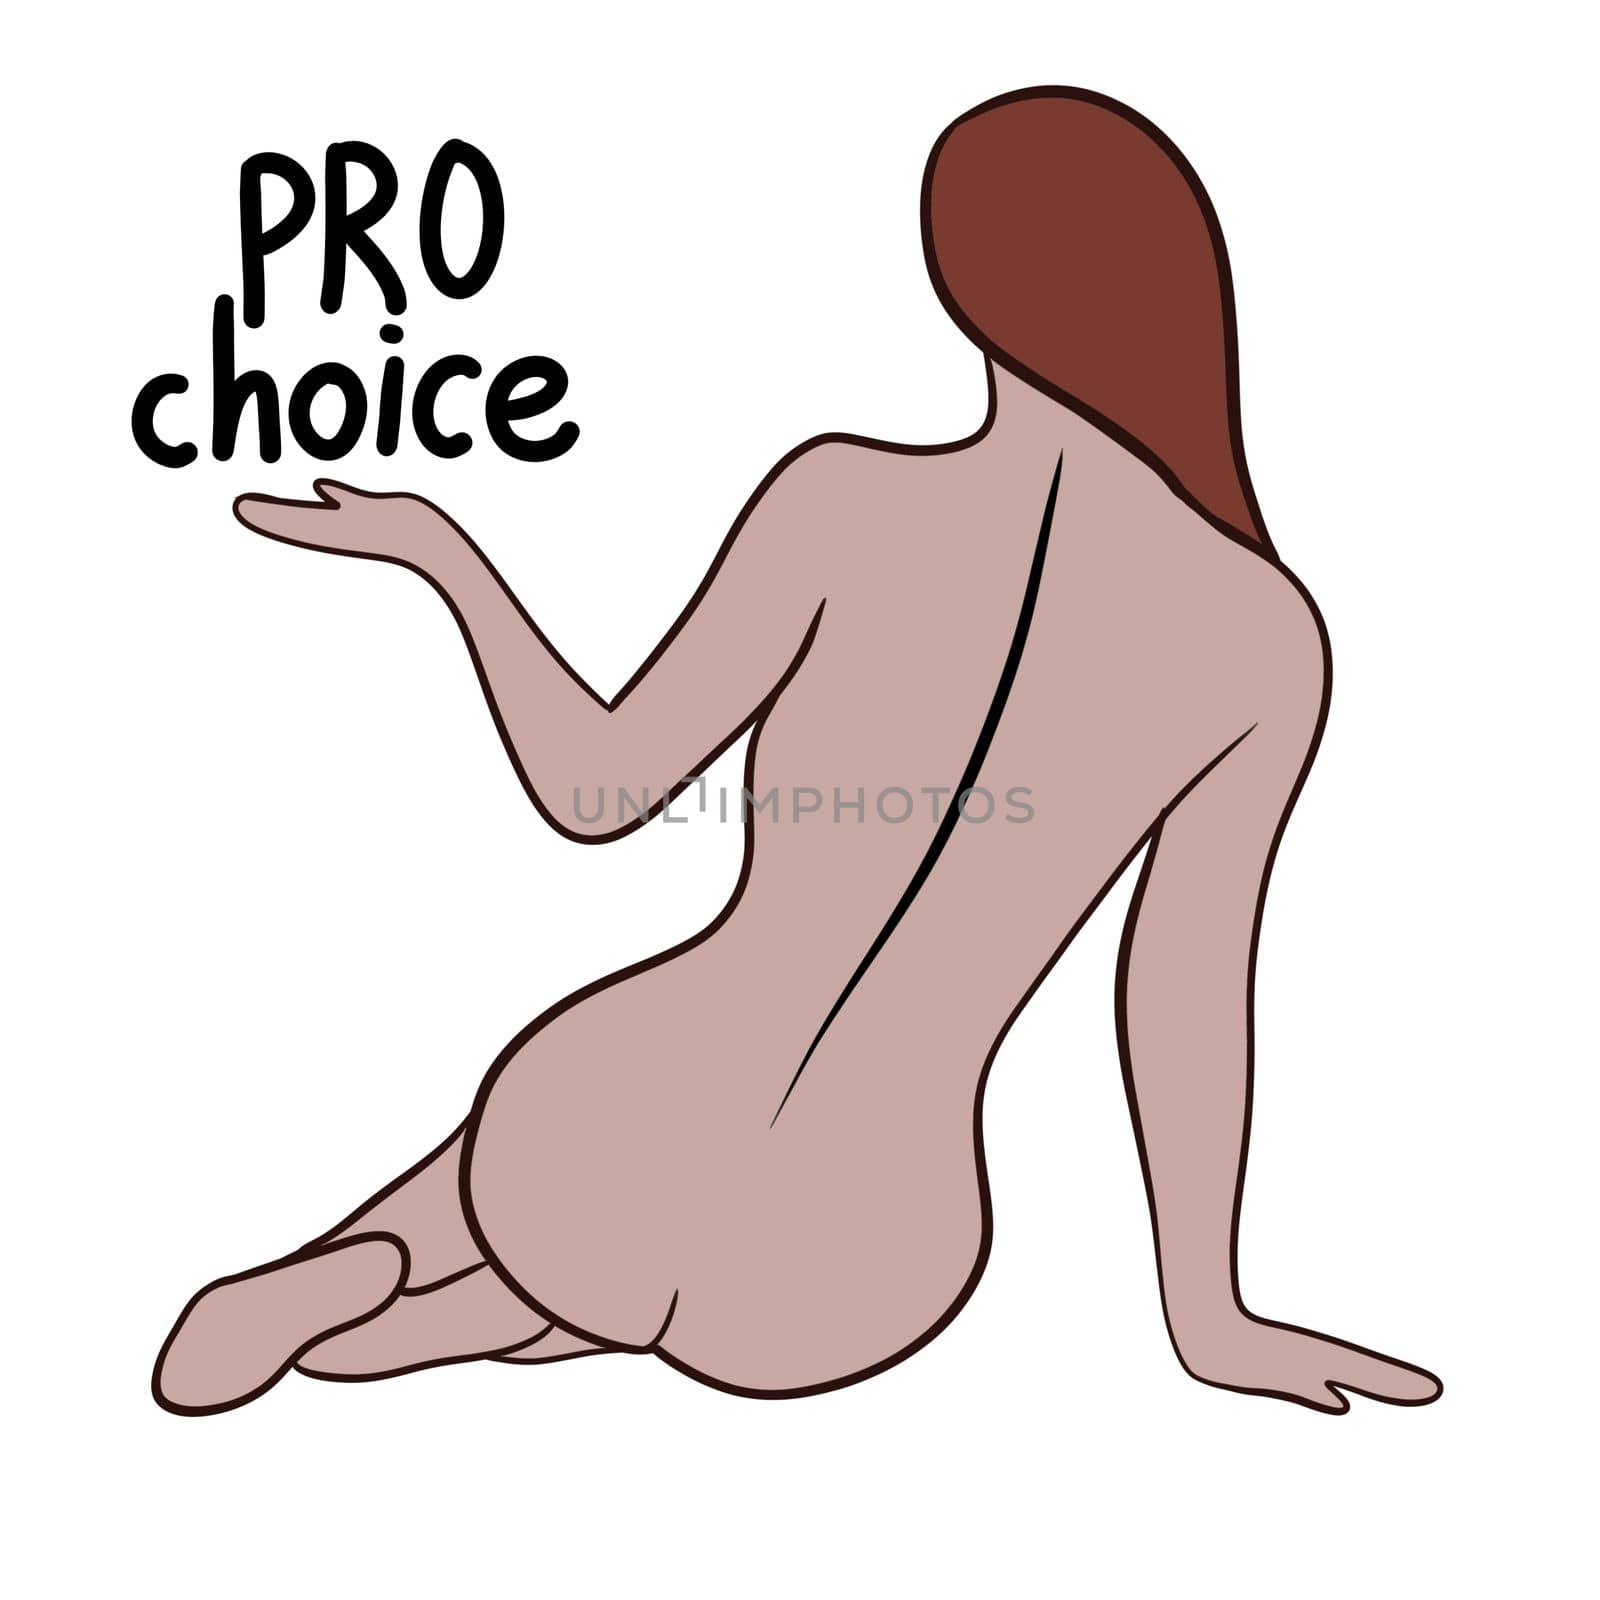 My body my choice hand drawn illustration with woman brown body. Feminism activism concept, reproductive abortion rights, row v wade design. Woman with pro choice words lettering red hair